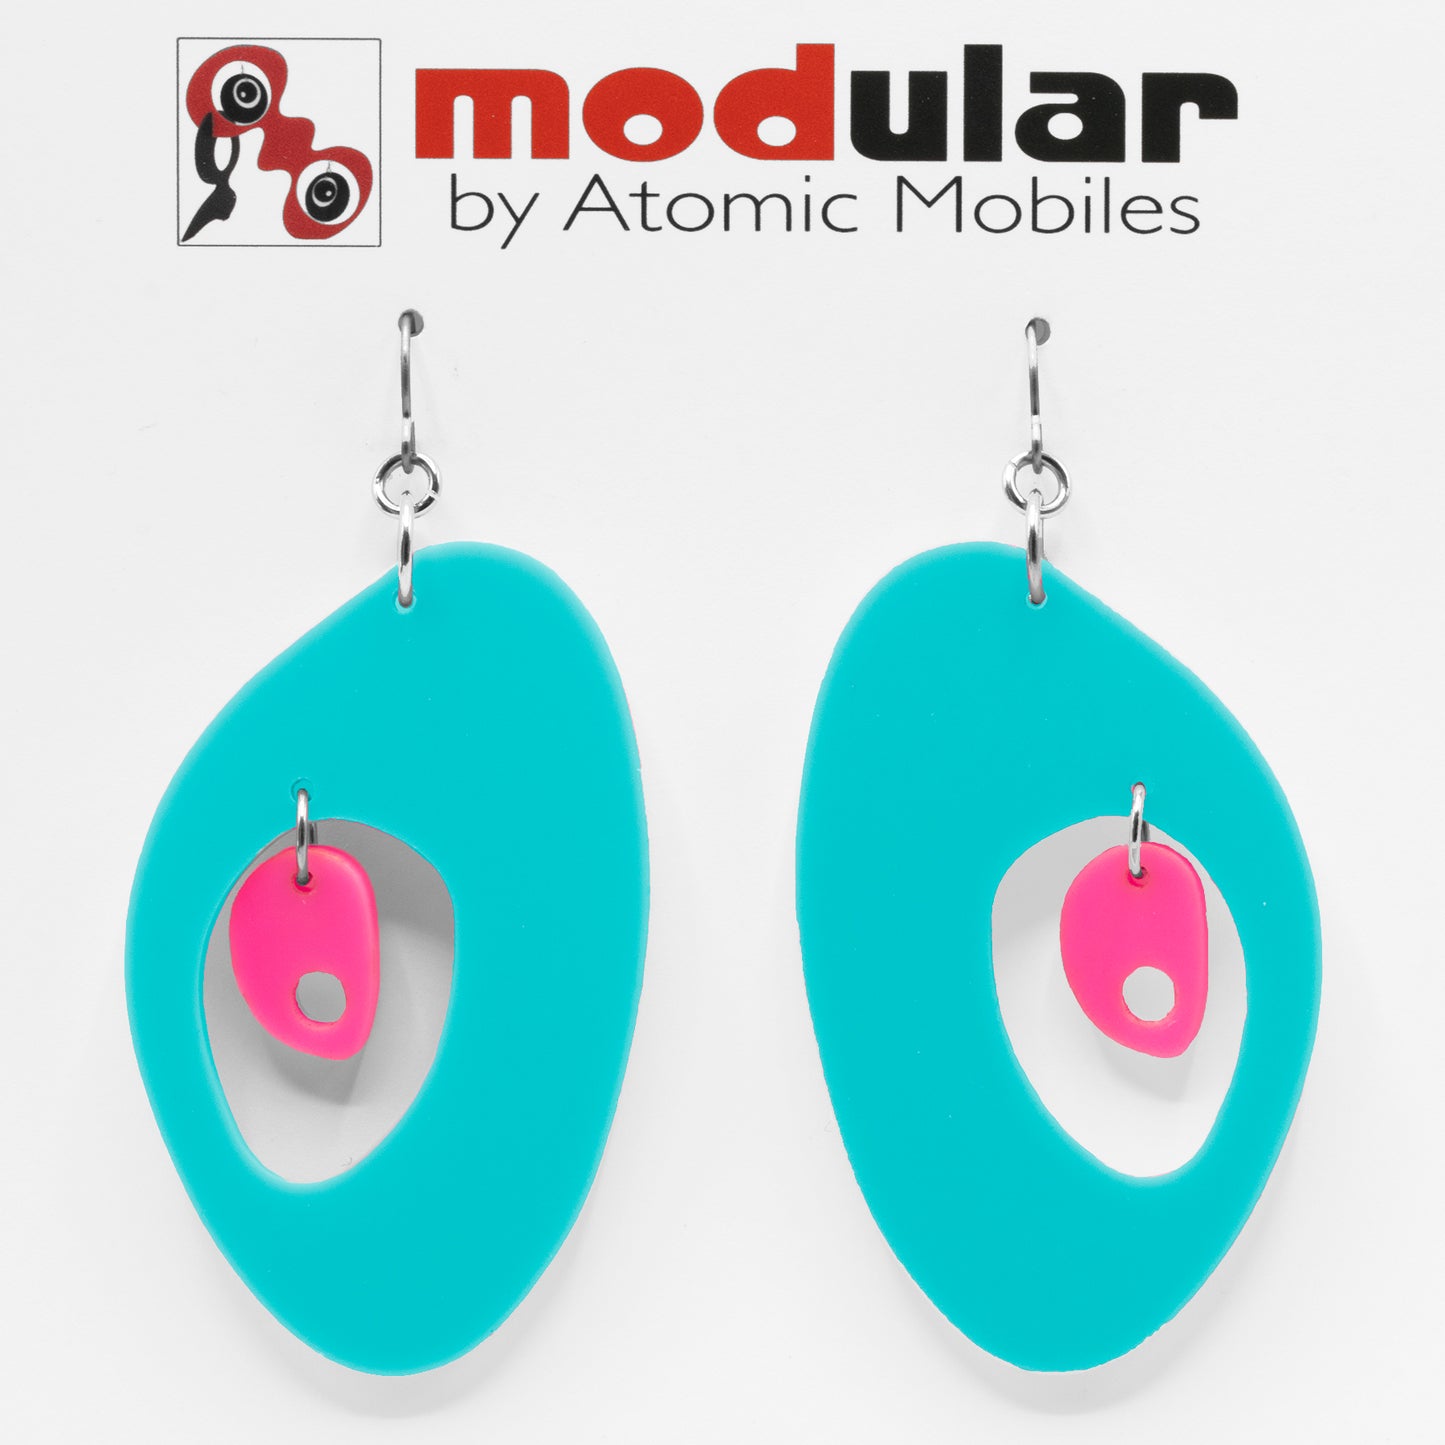 MODular Earrings - The Modernist Statement Earrings in Aqua and Hot Pink by AtomicMobiles.com - retro era inspired mod handmade jewelry